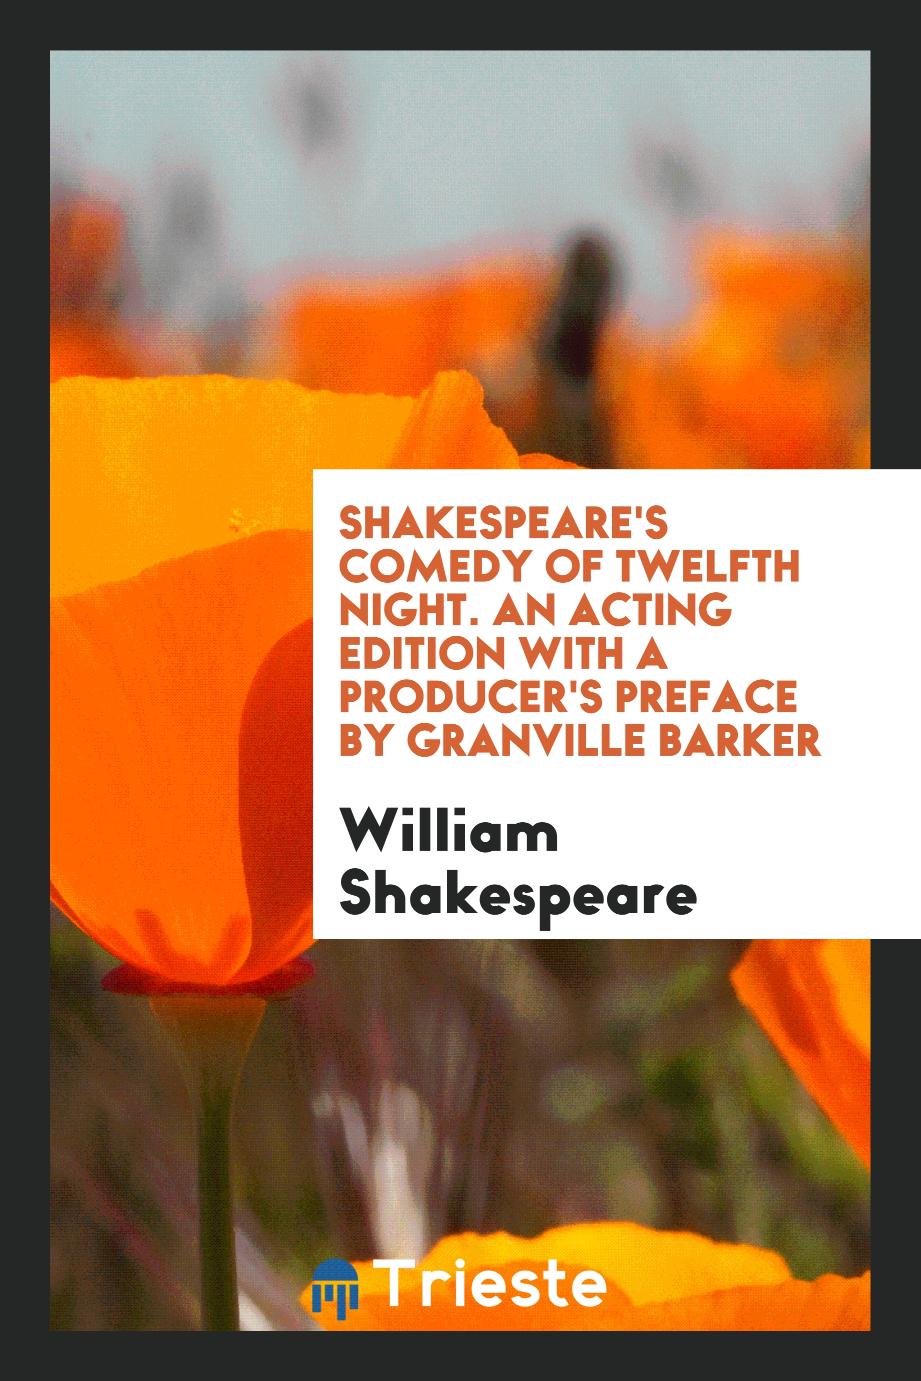 Shakespeare's comedy of twelfth night. An acting edition with a producer's preface by Granville Barker